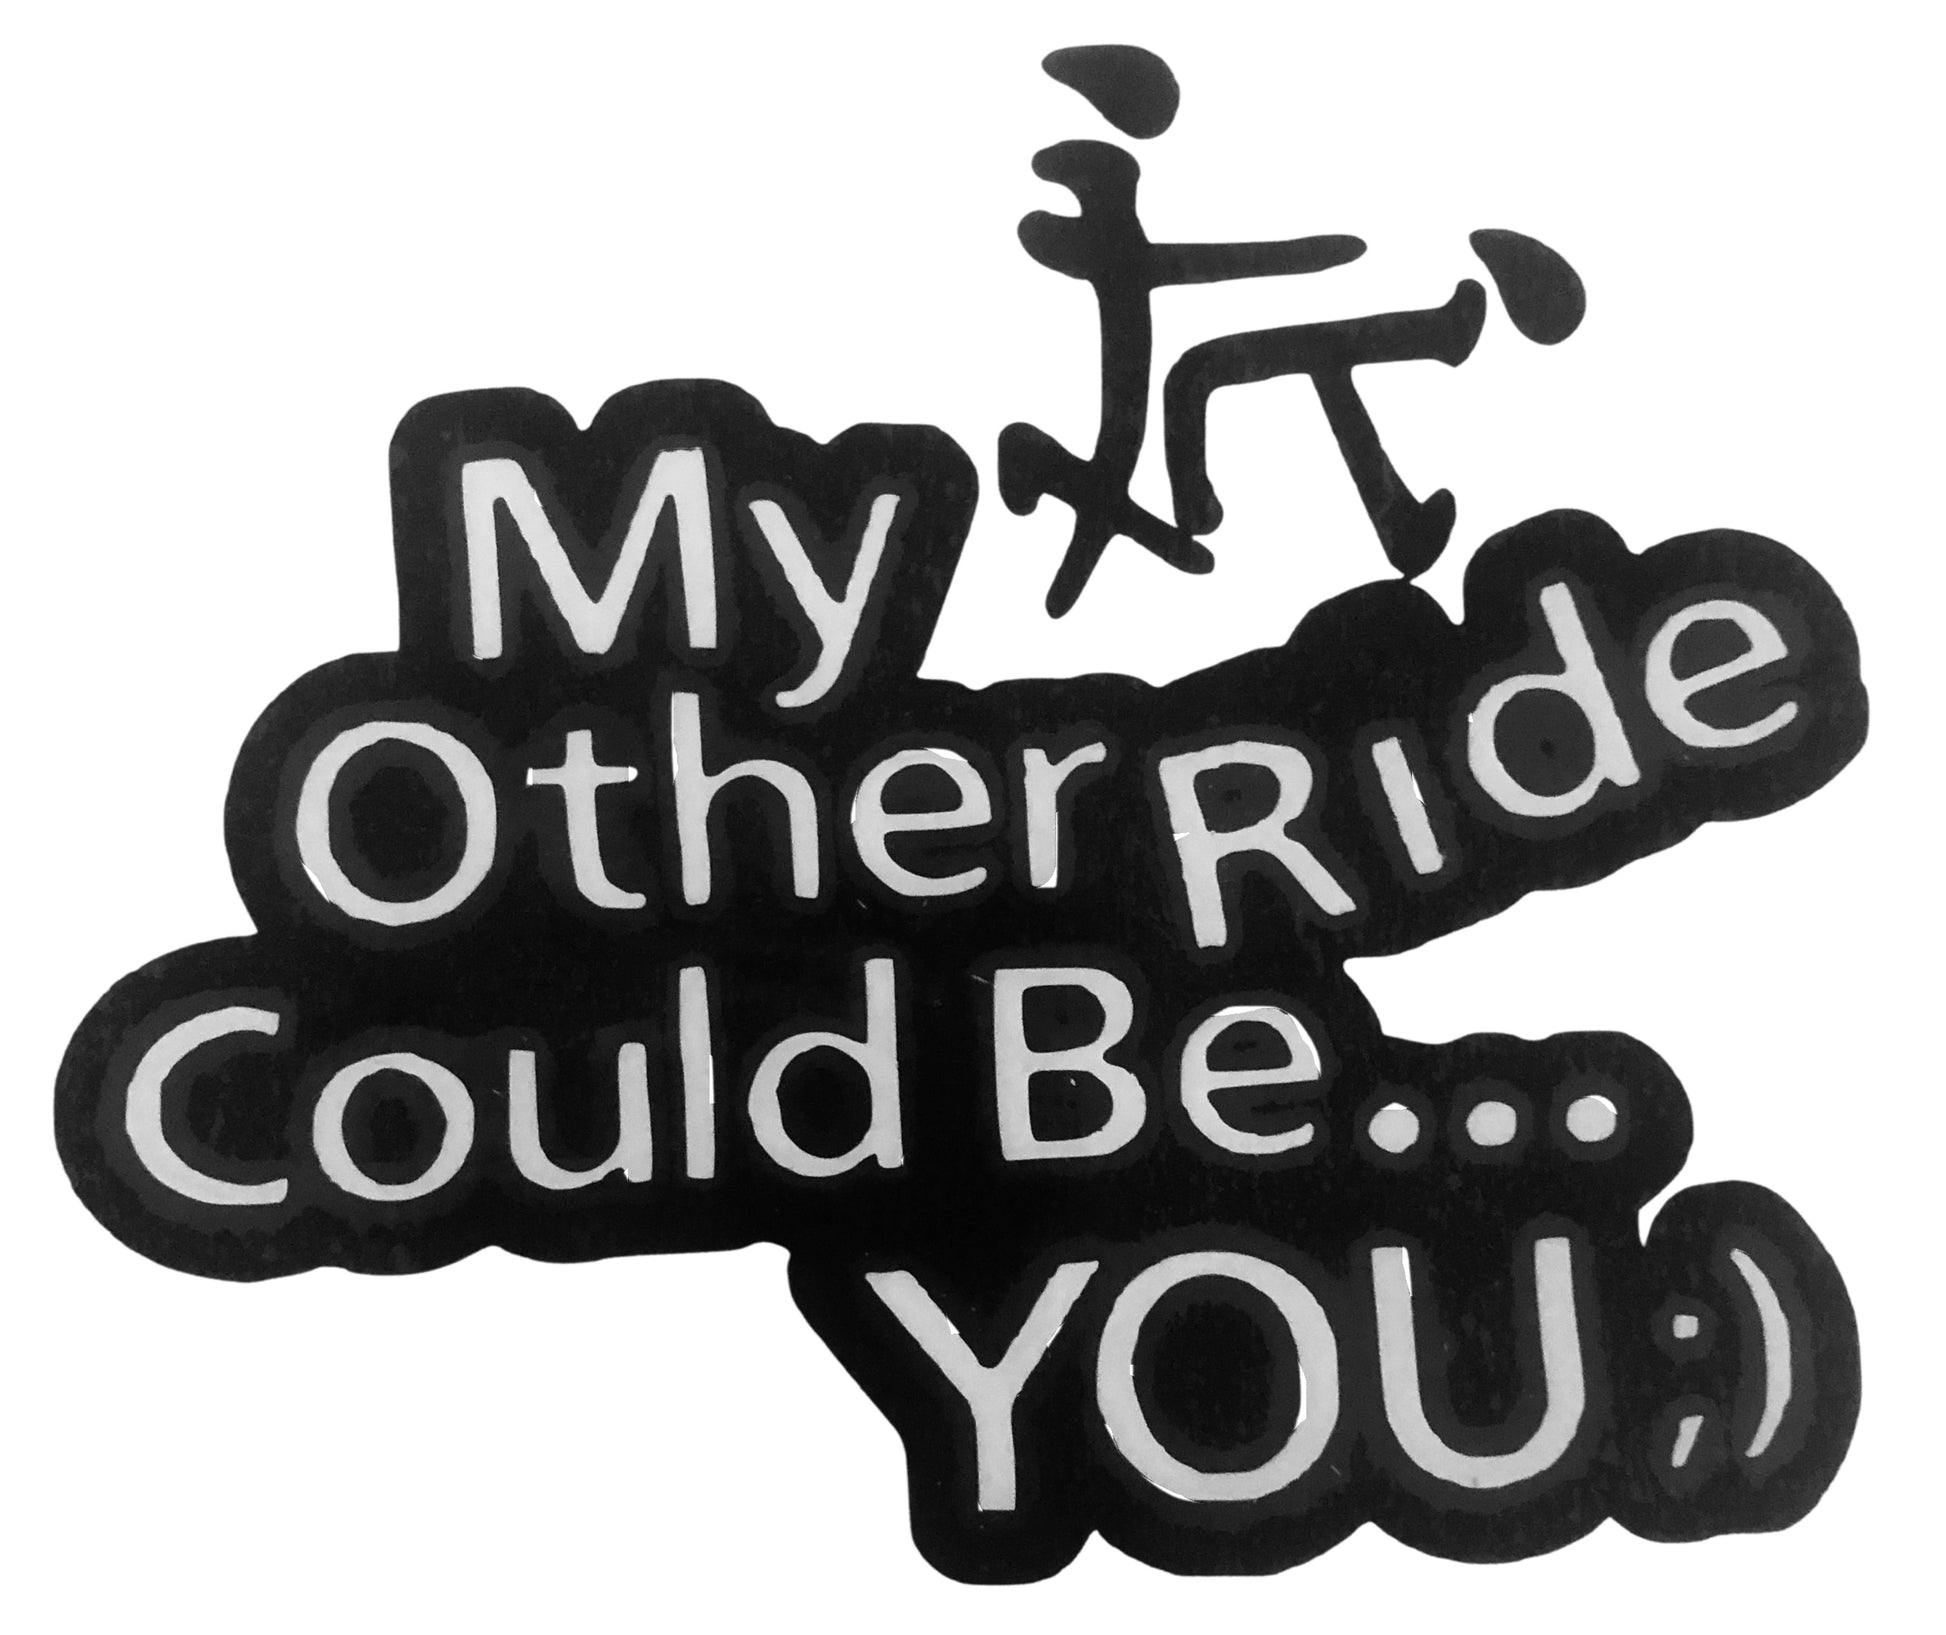 My Other Ride Could Be You Vinyl Car Window Decal Material: Oracal 651 permanent vinyl Color: White & Black